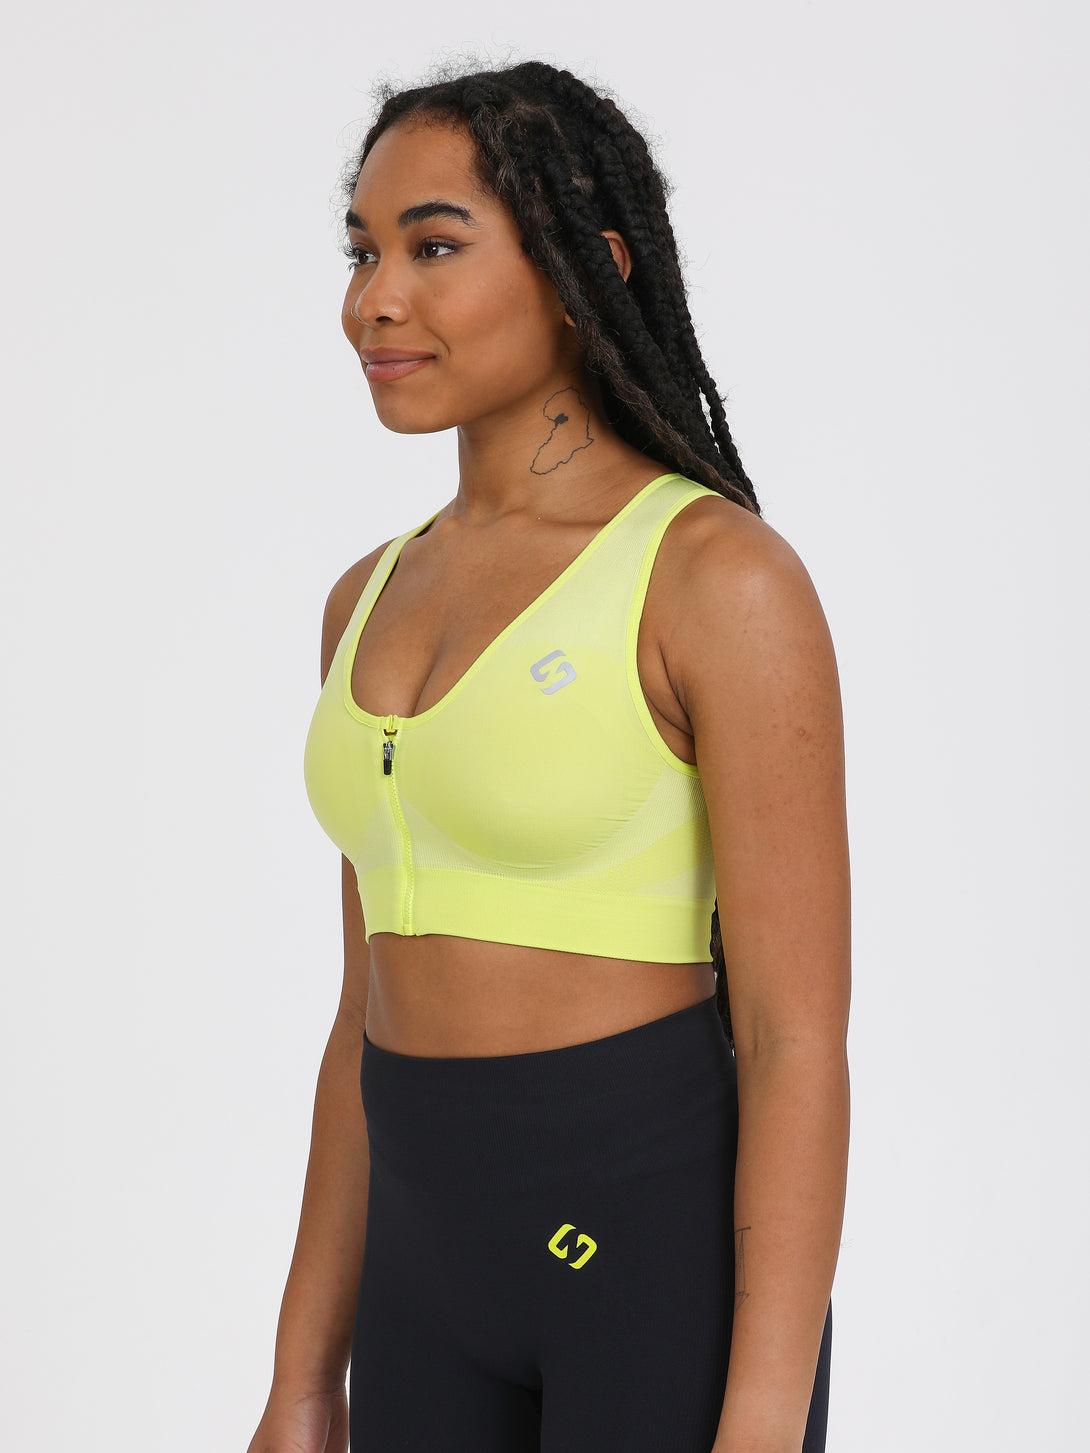 A Woman Wearing Lime Color High Impact Sports Bra